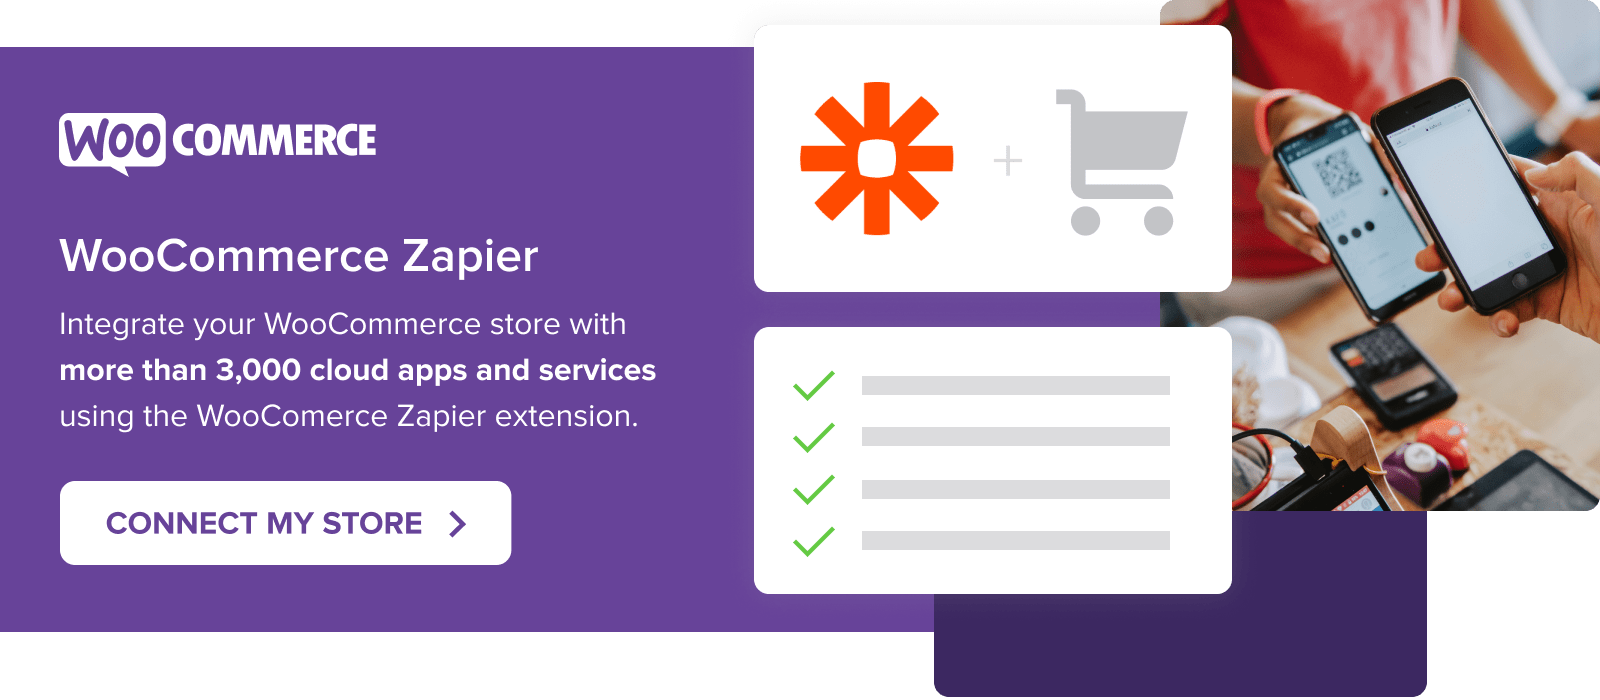 Integrate your WooCommerce store with cloud apps and services using Zapier